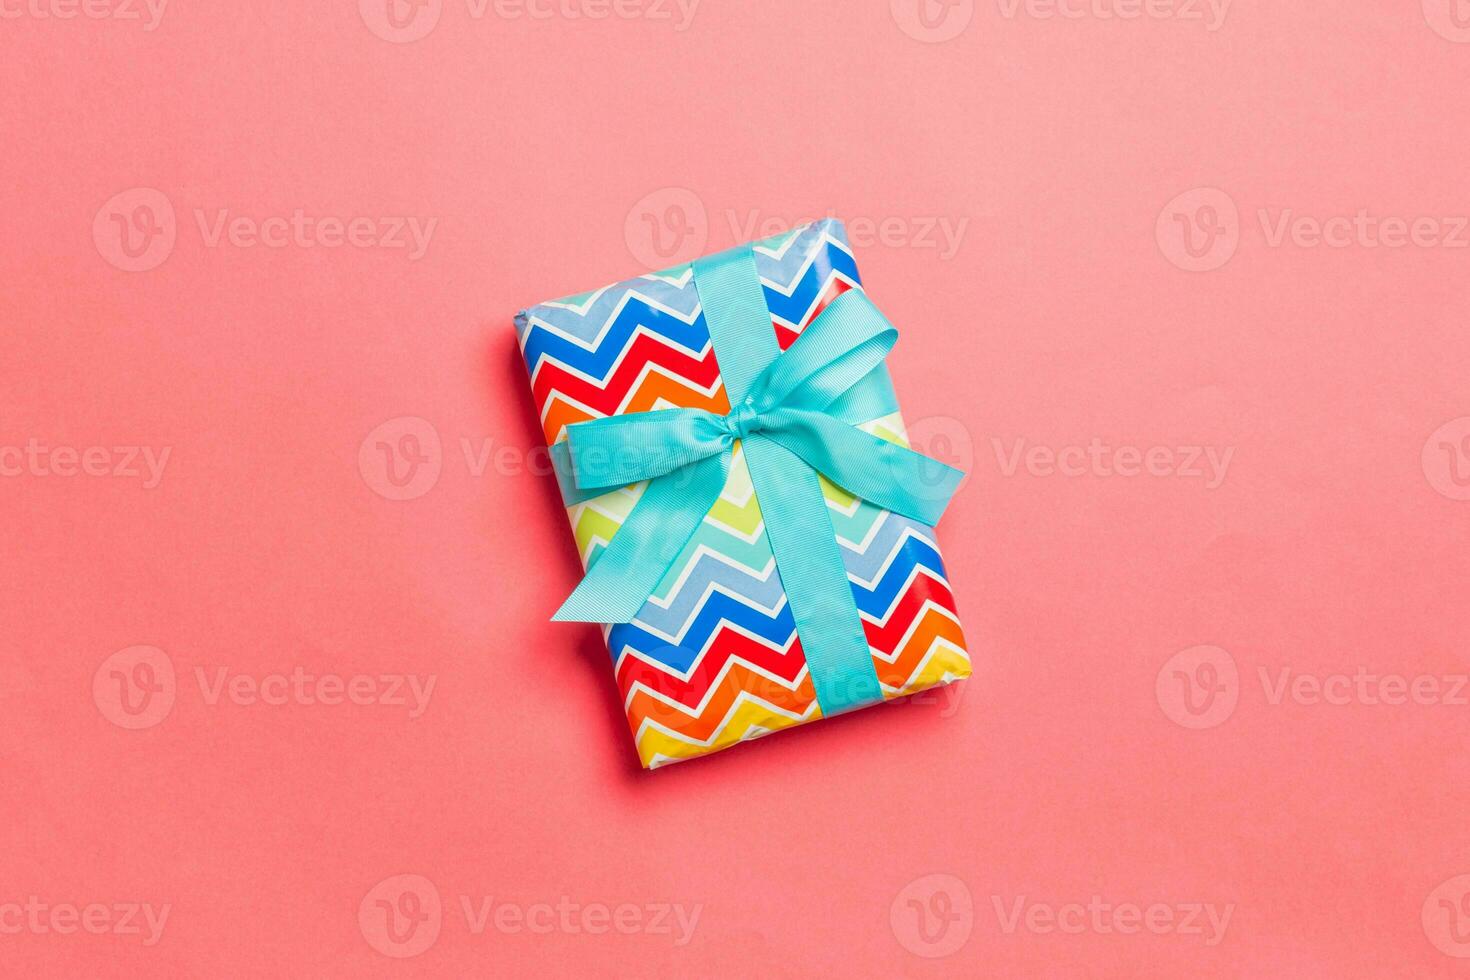 wrapped Christmas or other holiday handmade present in paper with blue ribbon on living coral background. Present box, decoration of gift on colored table, top view with copy space photo